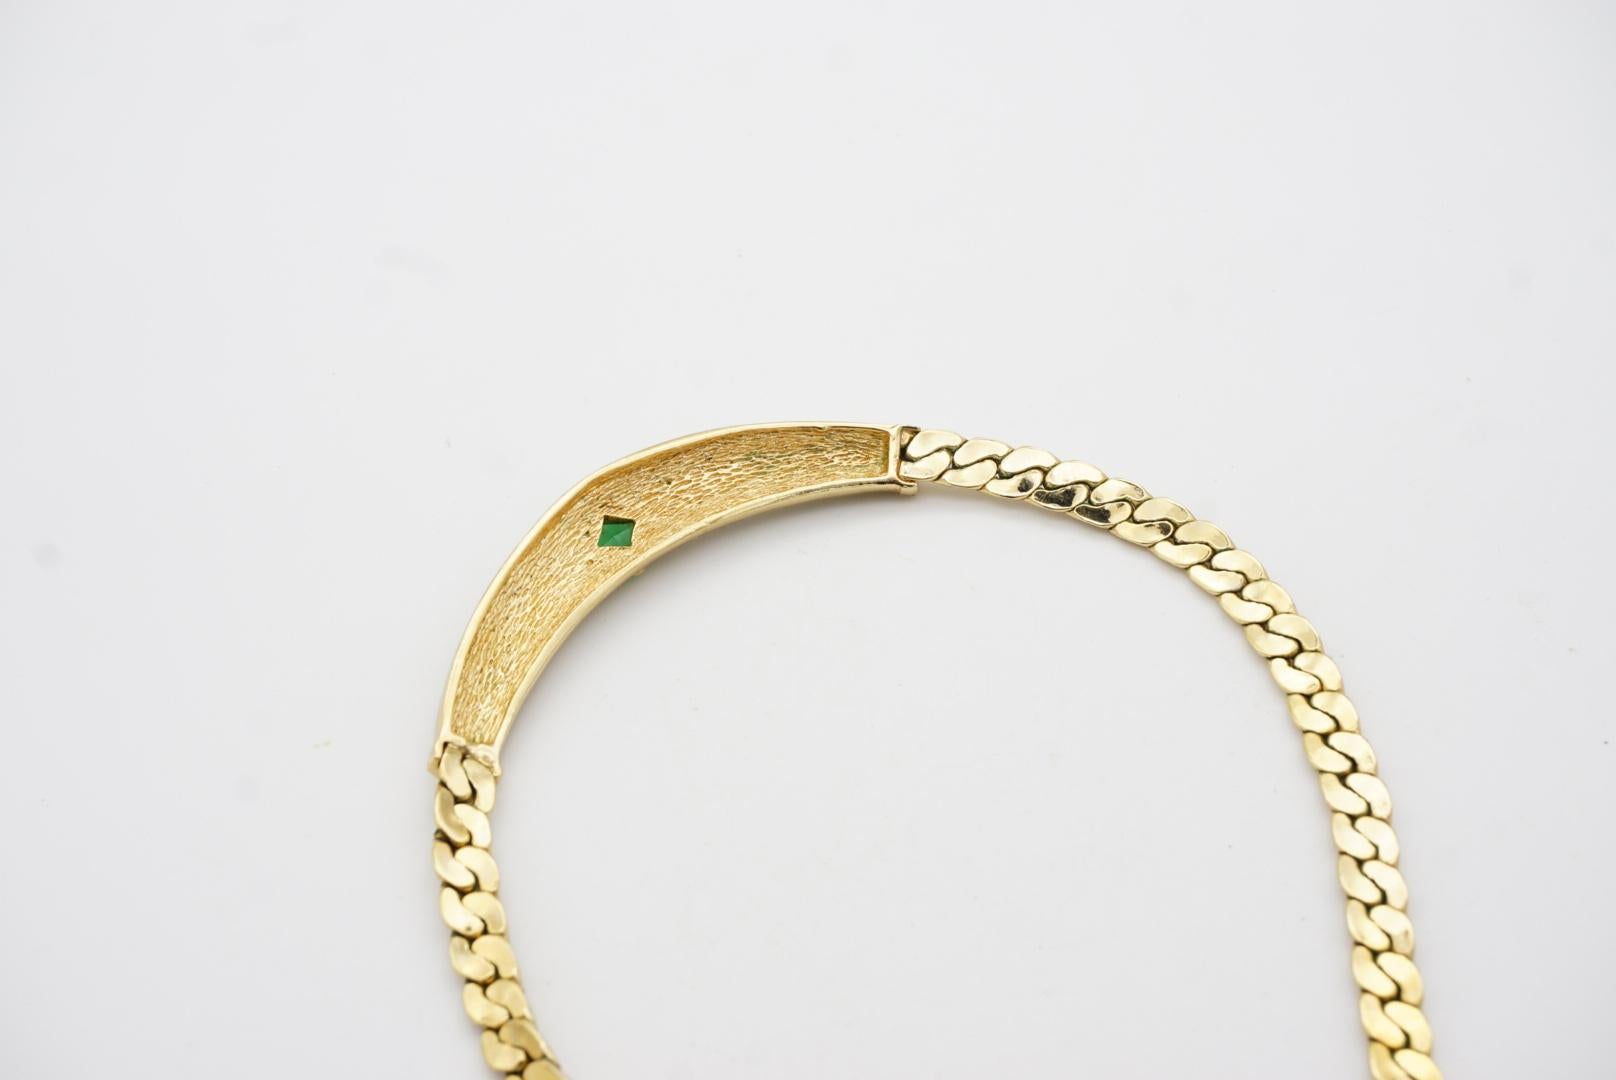 Christian Dior Vintage 1980s Emerald Green Gripoix Black Crystals Gold Necklace For Sale 8